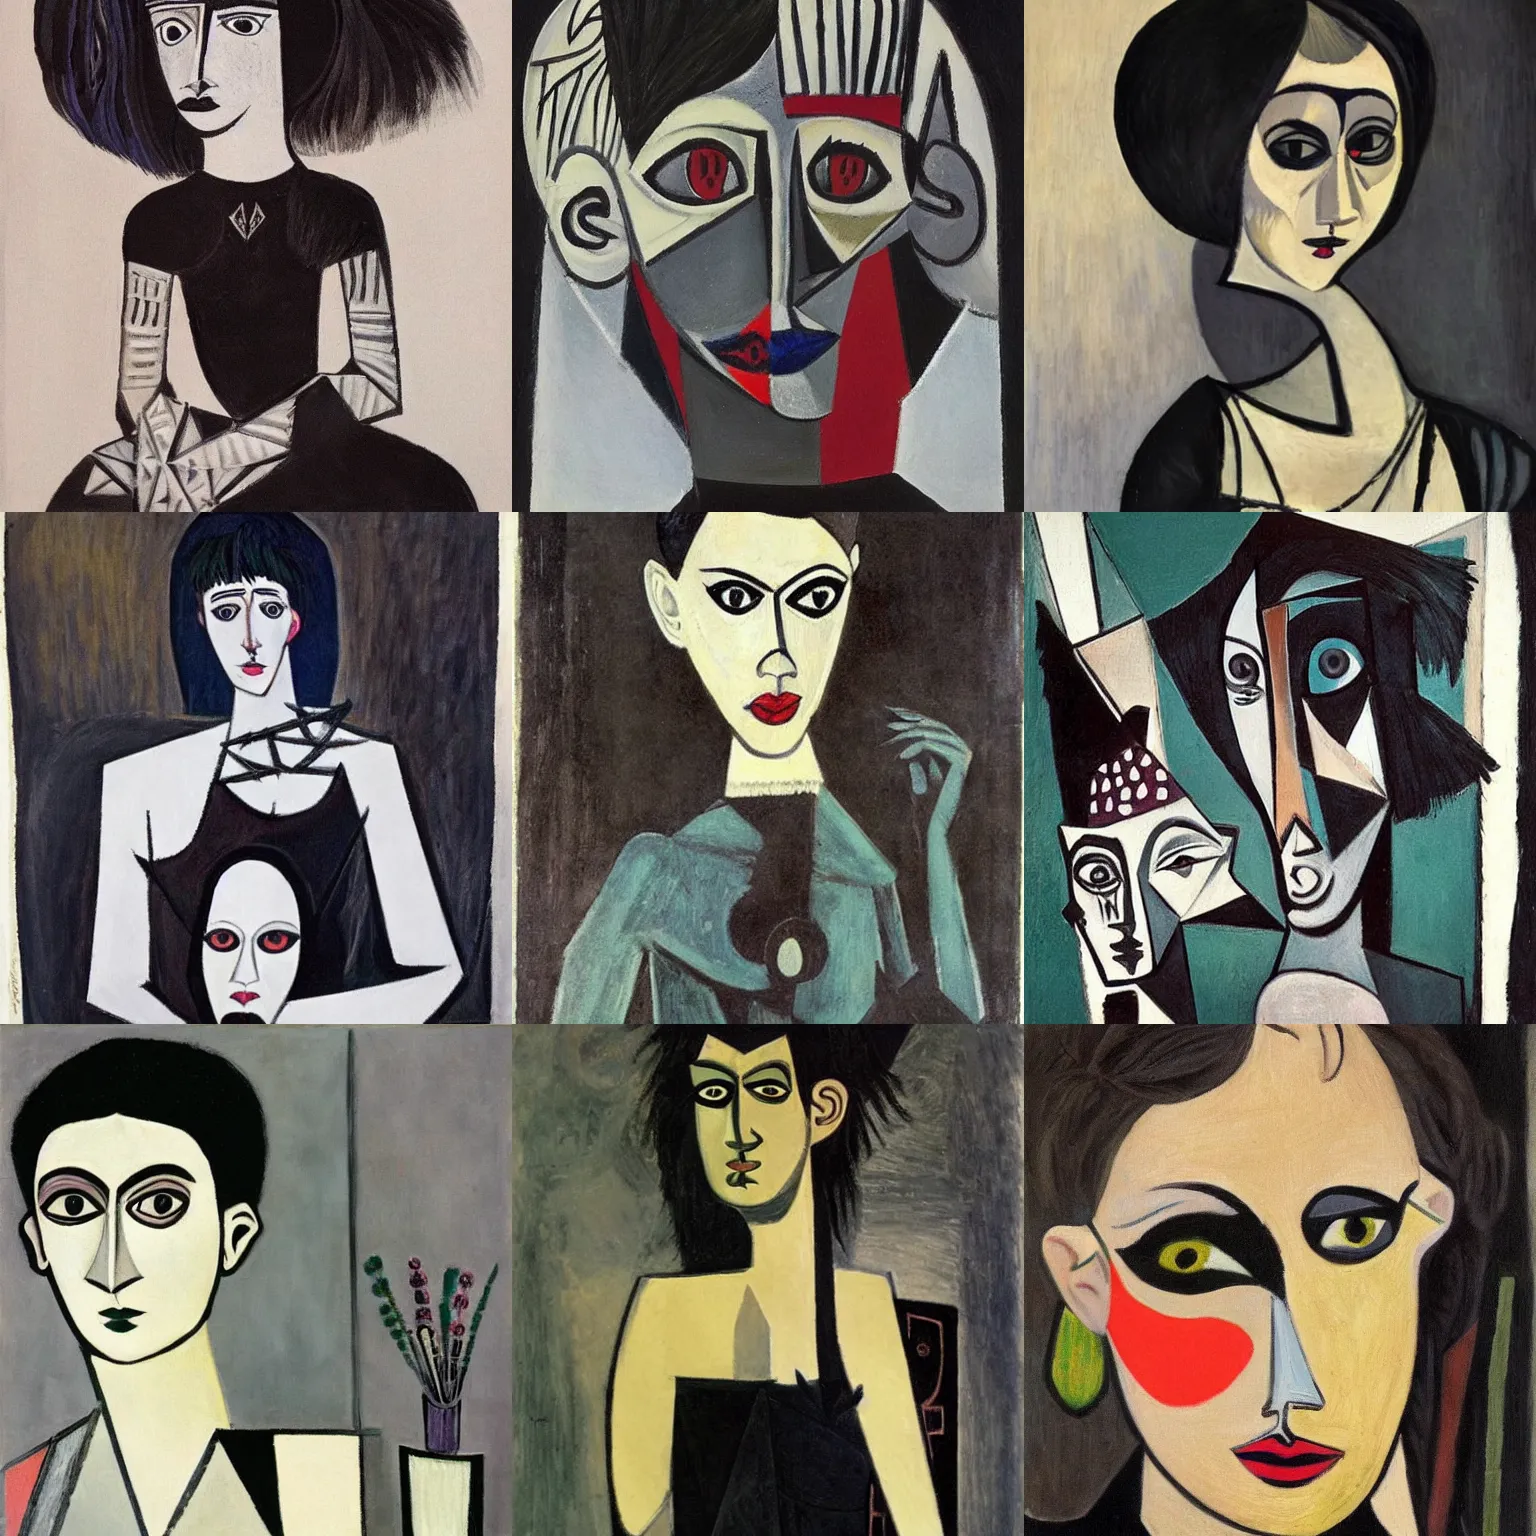 Prompt: a goth portrait painted by pablo picasso. her hair is dark brown and cut into a short, messy pixie cut. she has large evil eyes with black contact lenses. she is wearing a black tank top, a black leather jacket, a black knee - length skirt, a black choker, and black leather boots.